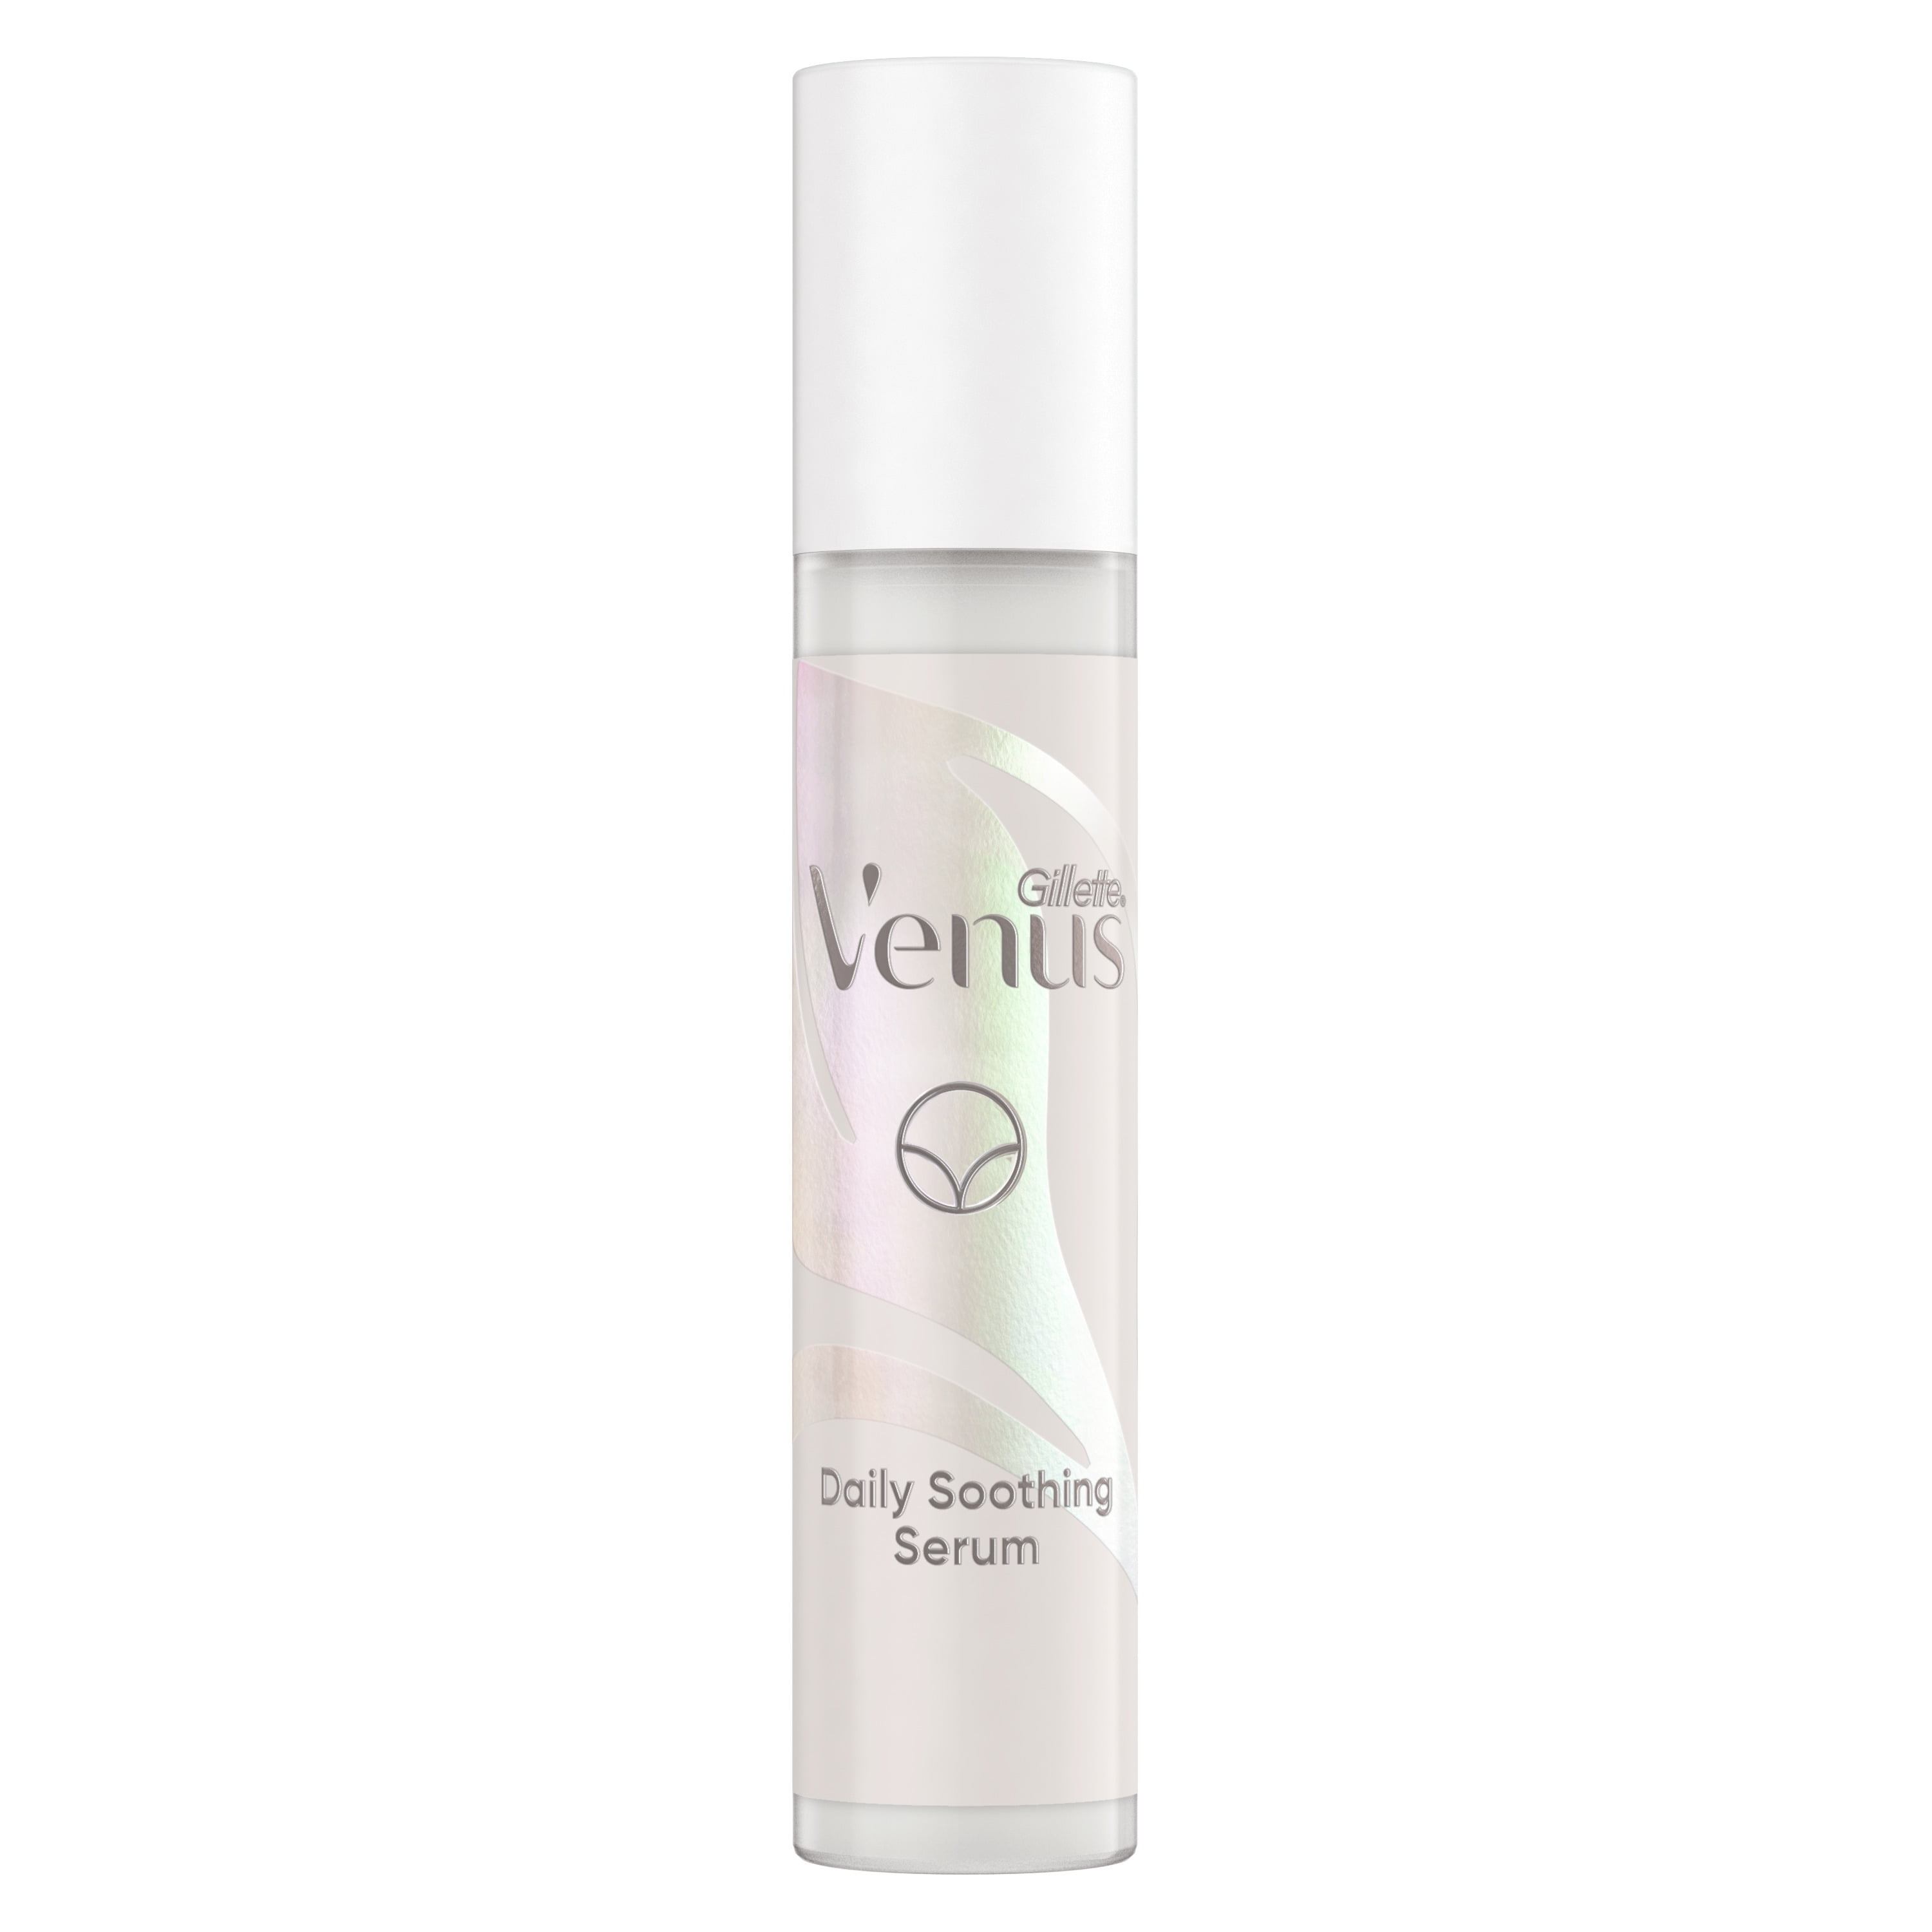 Gillette Venus for Pubic Hair and Skin, Daily Soothing Serum,  oz -  